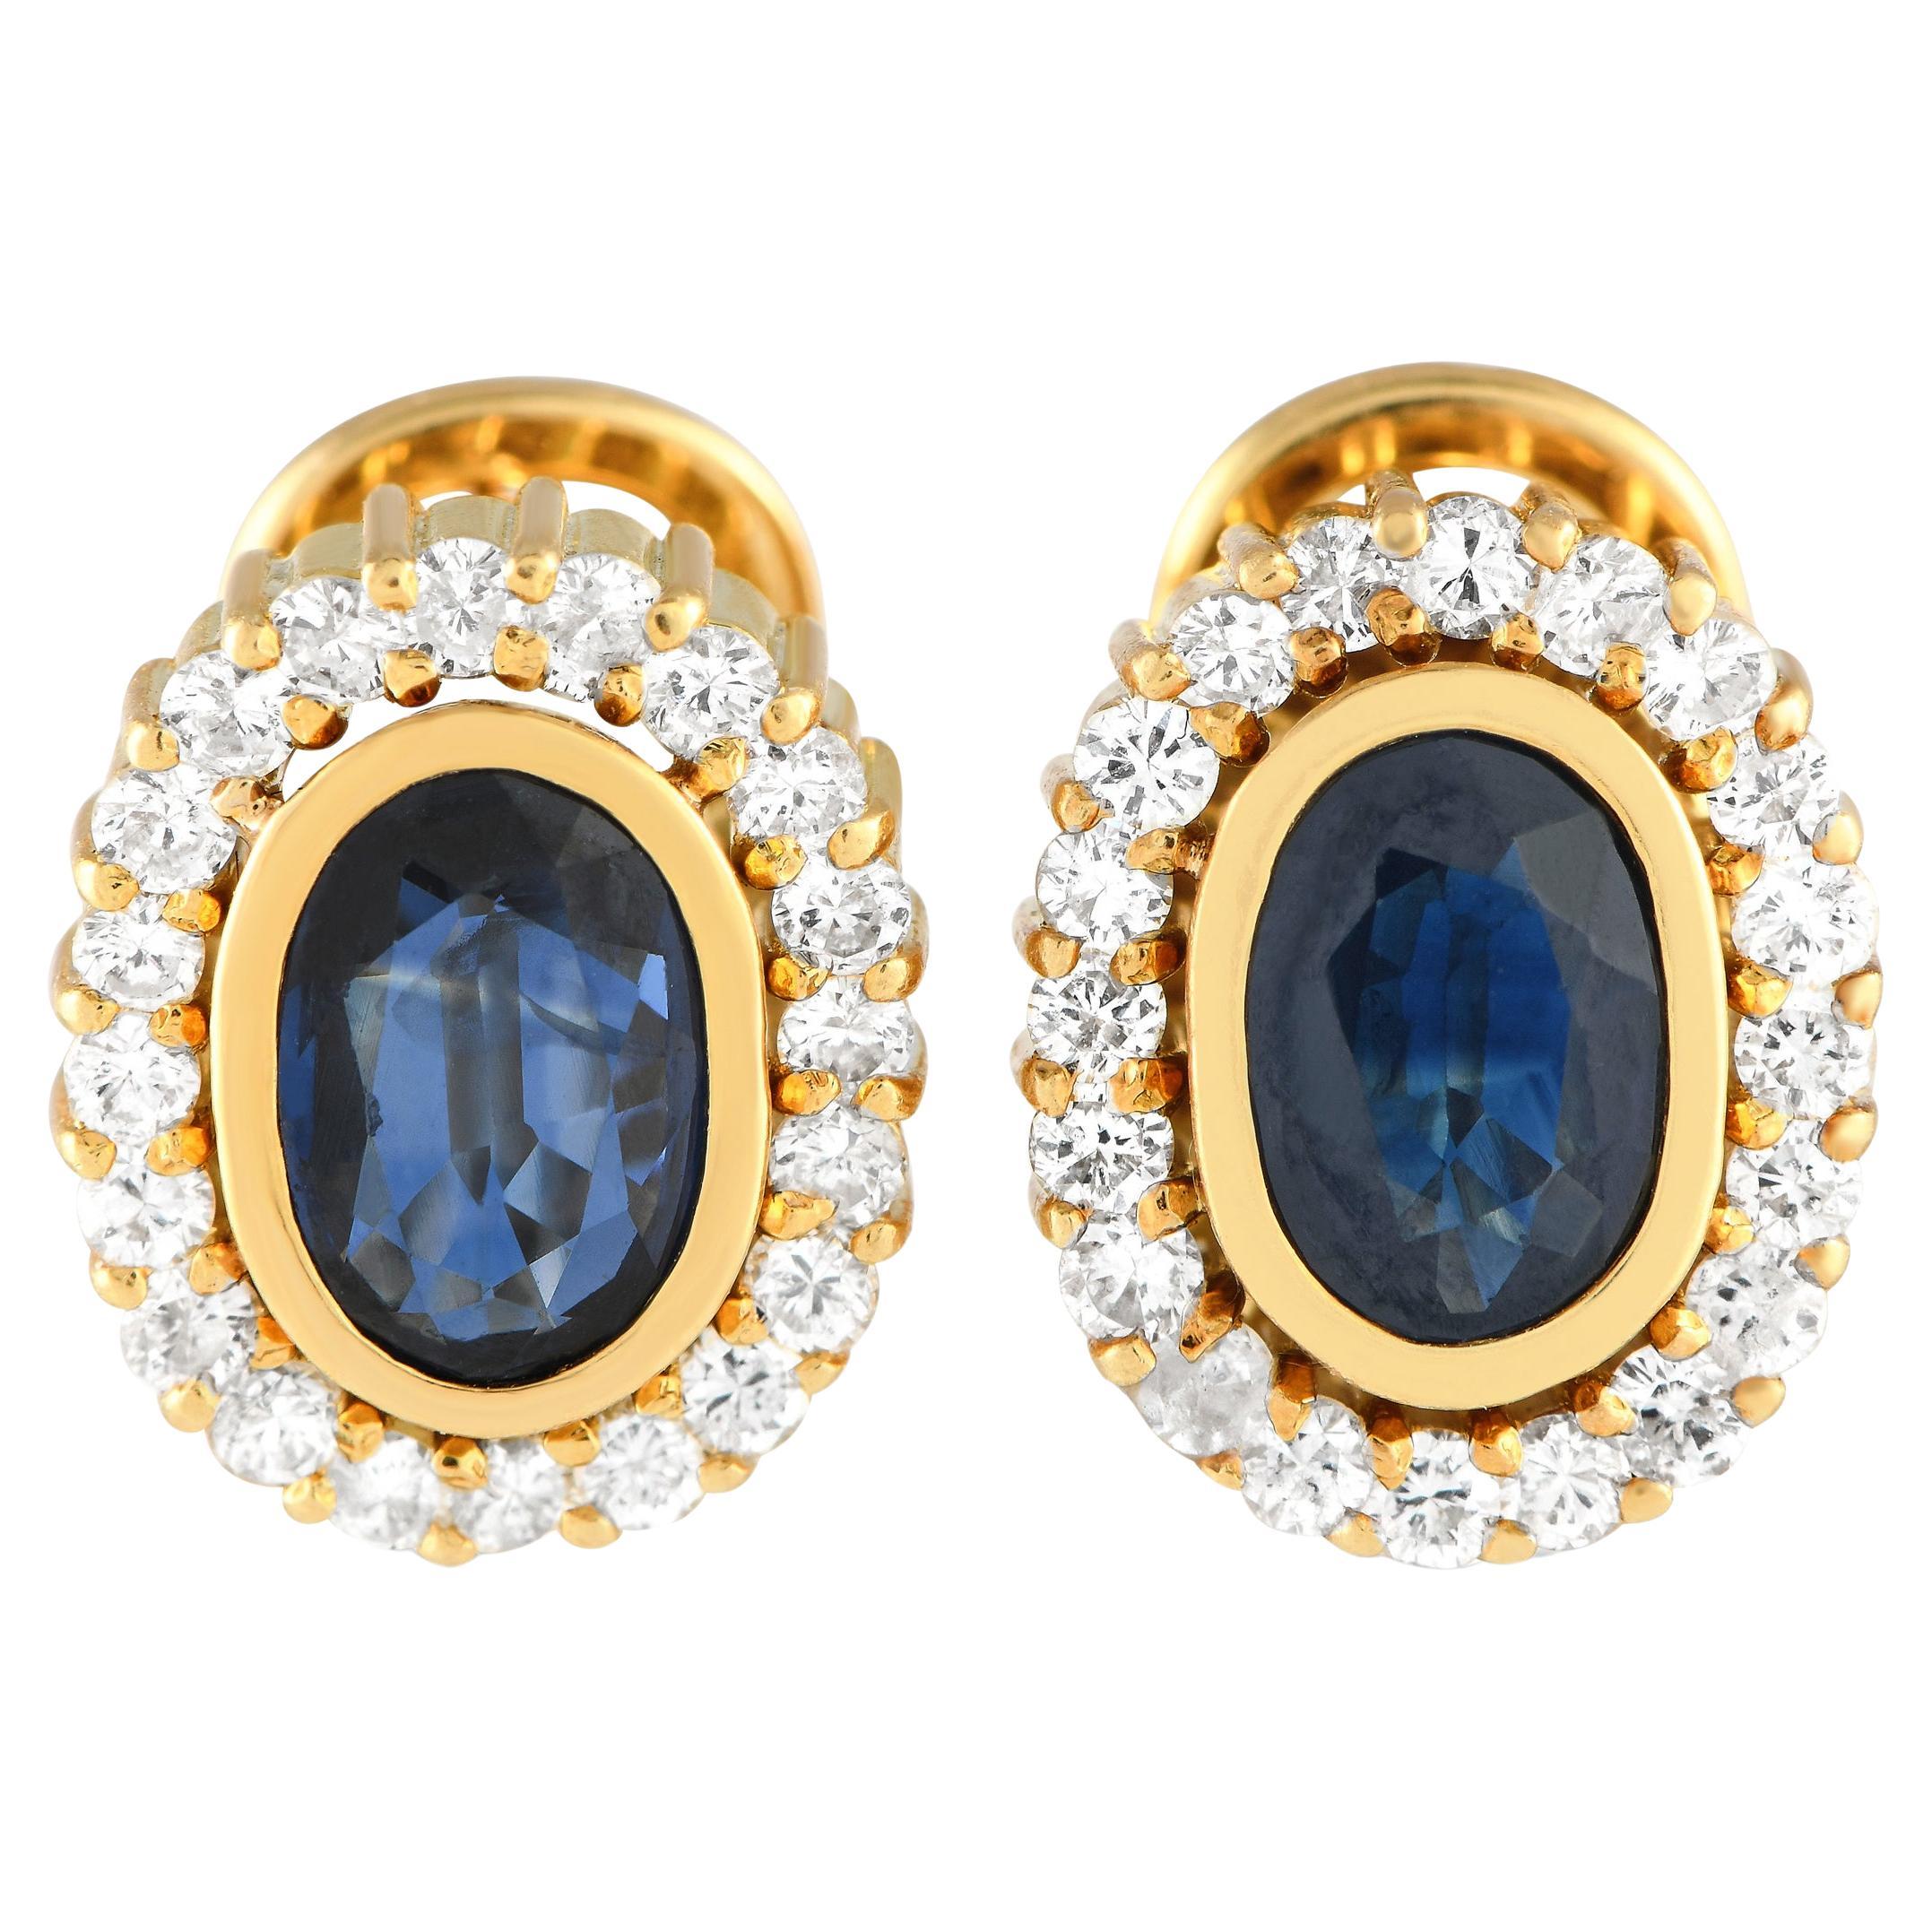 LB Exclusive 18K Yellow Gold 0.50ct Diamond and Sapphire Earrings